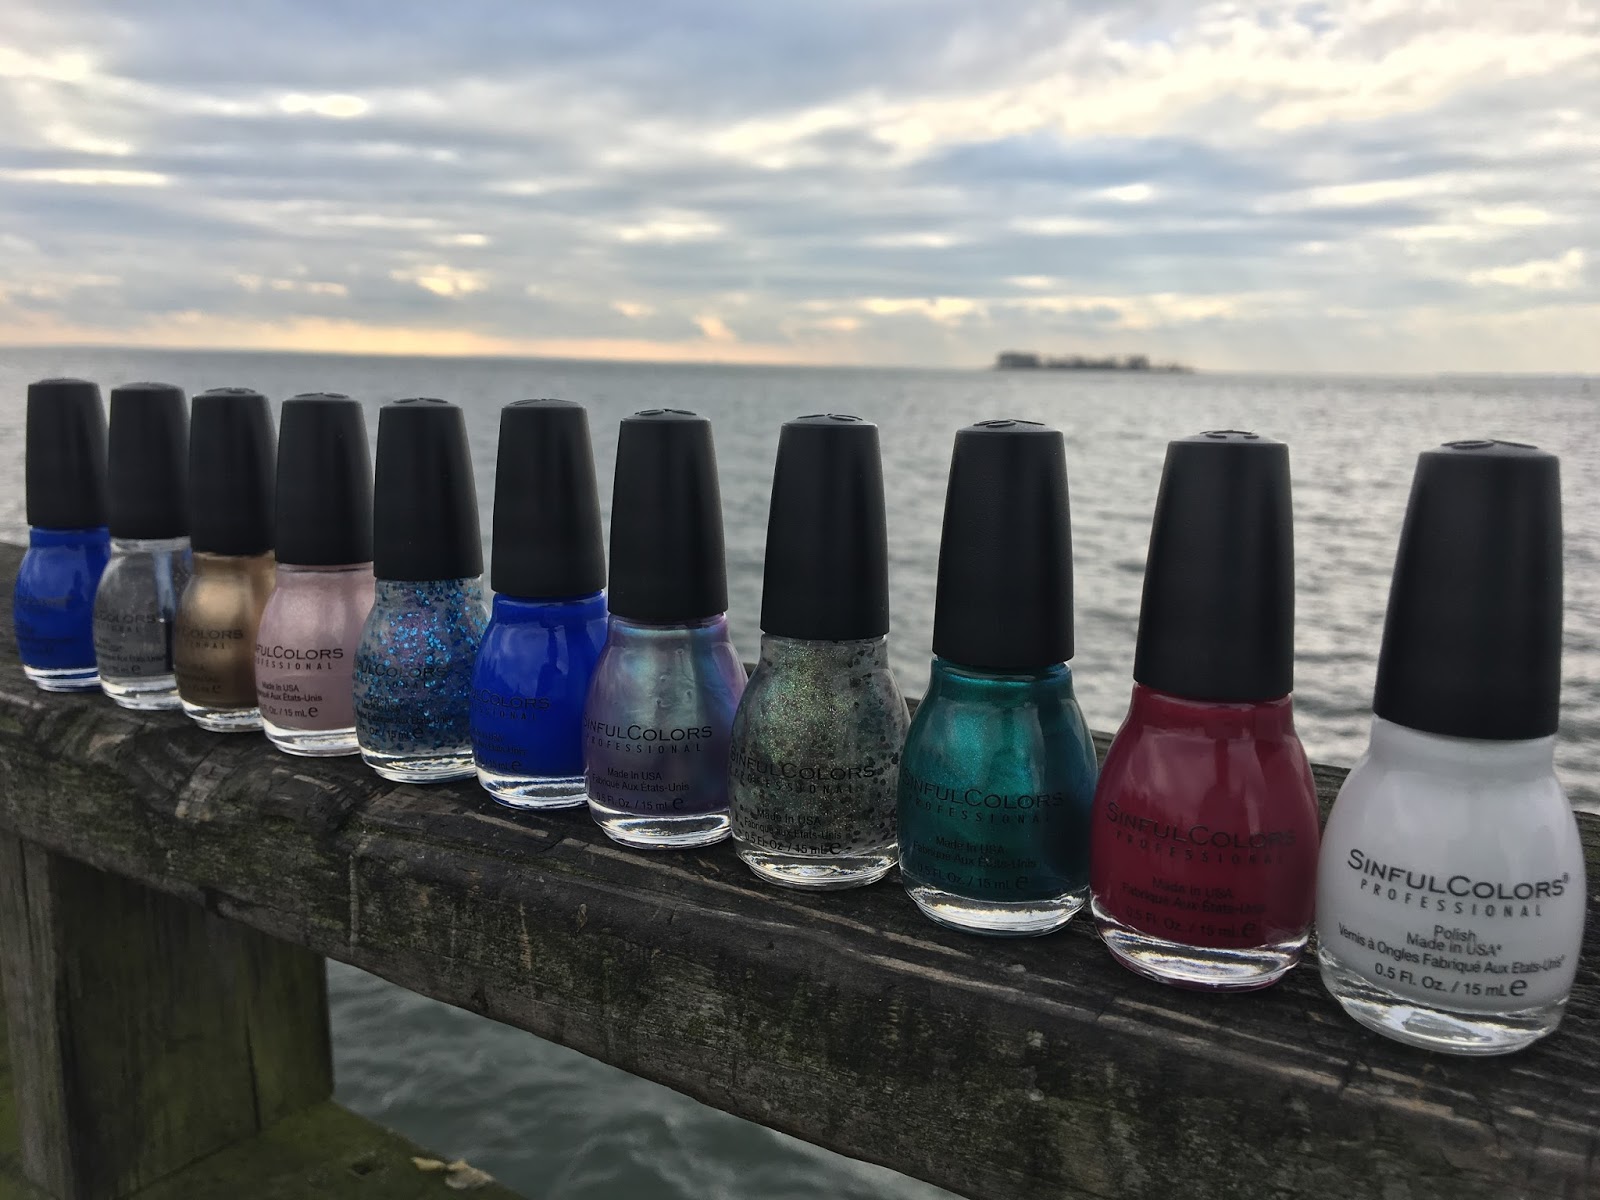 Sinful Colors Nail Polish Collection Sets - wide 8